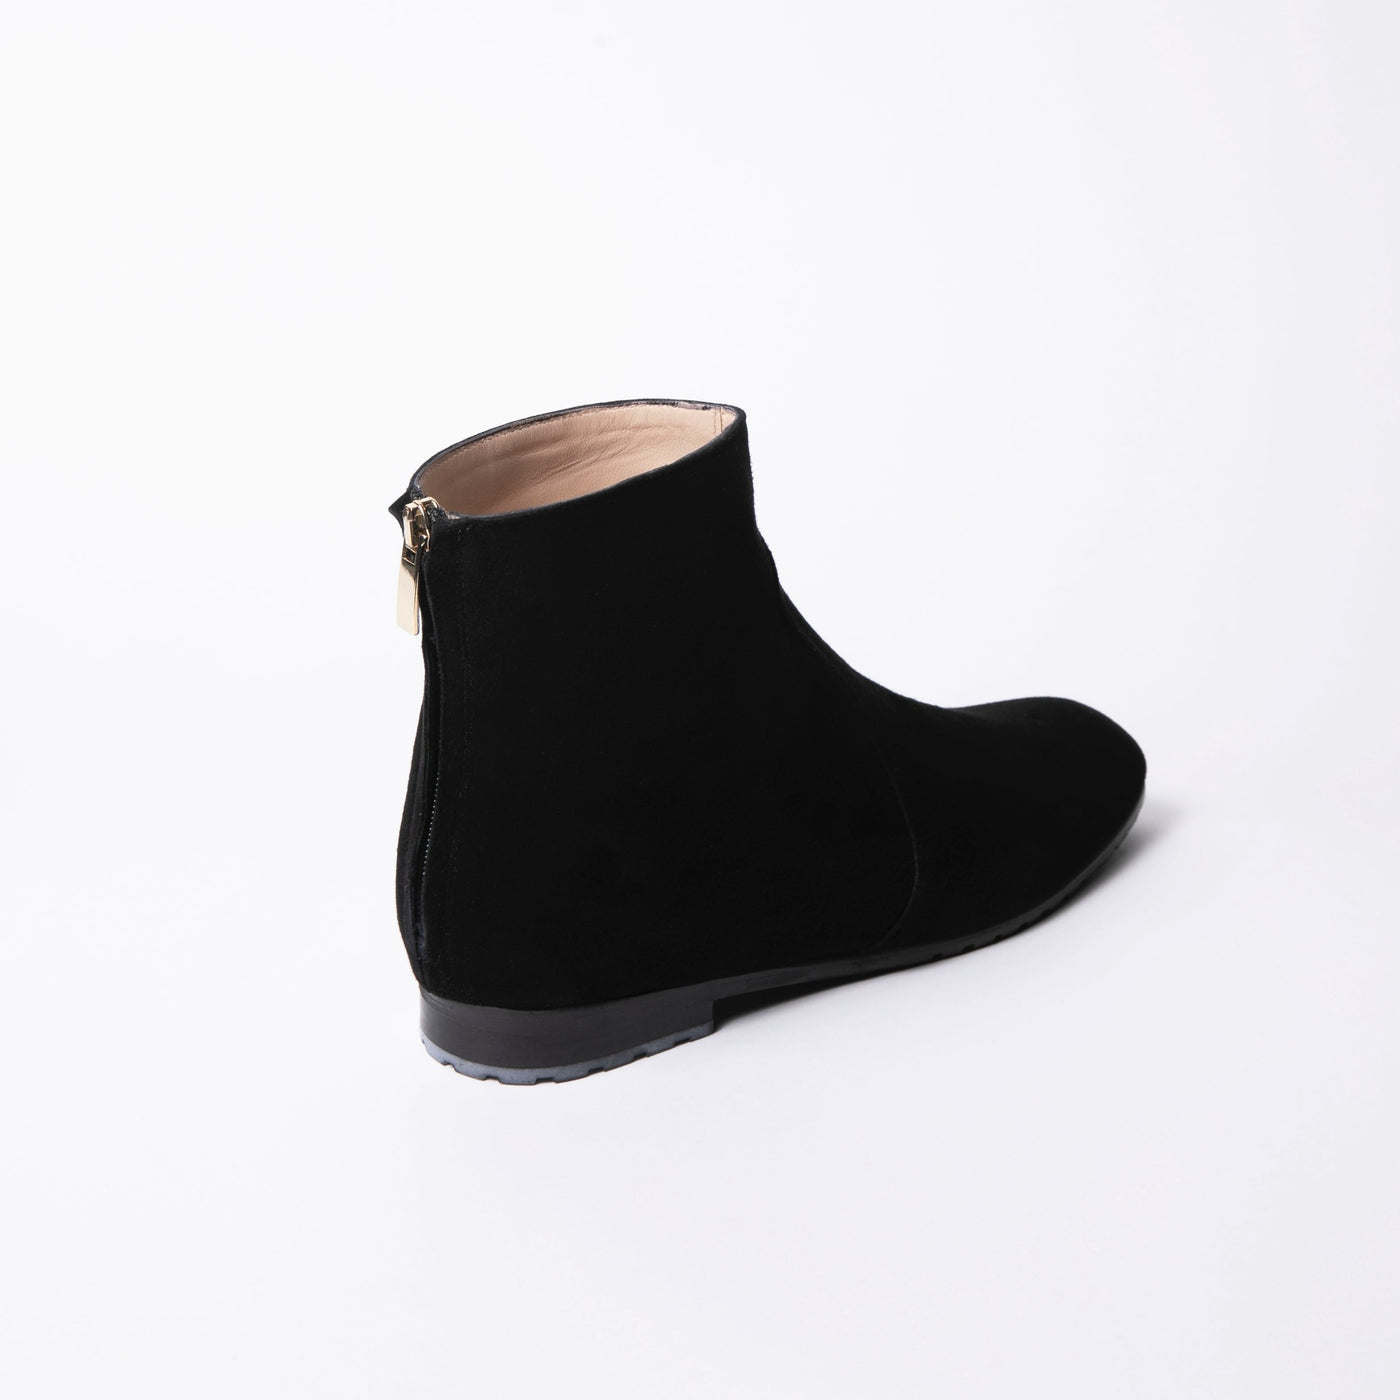 Flat black suede ankle boots with zipper in the back. 